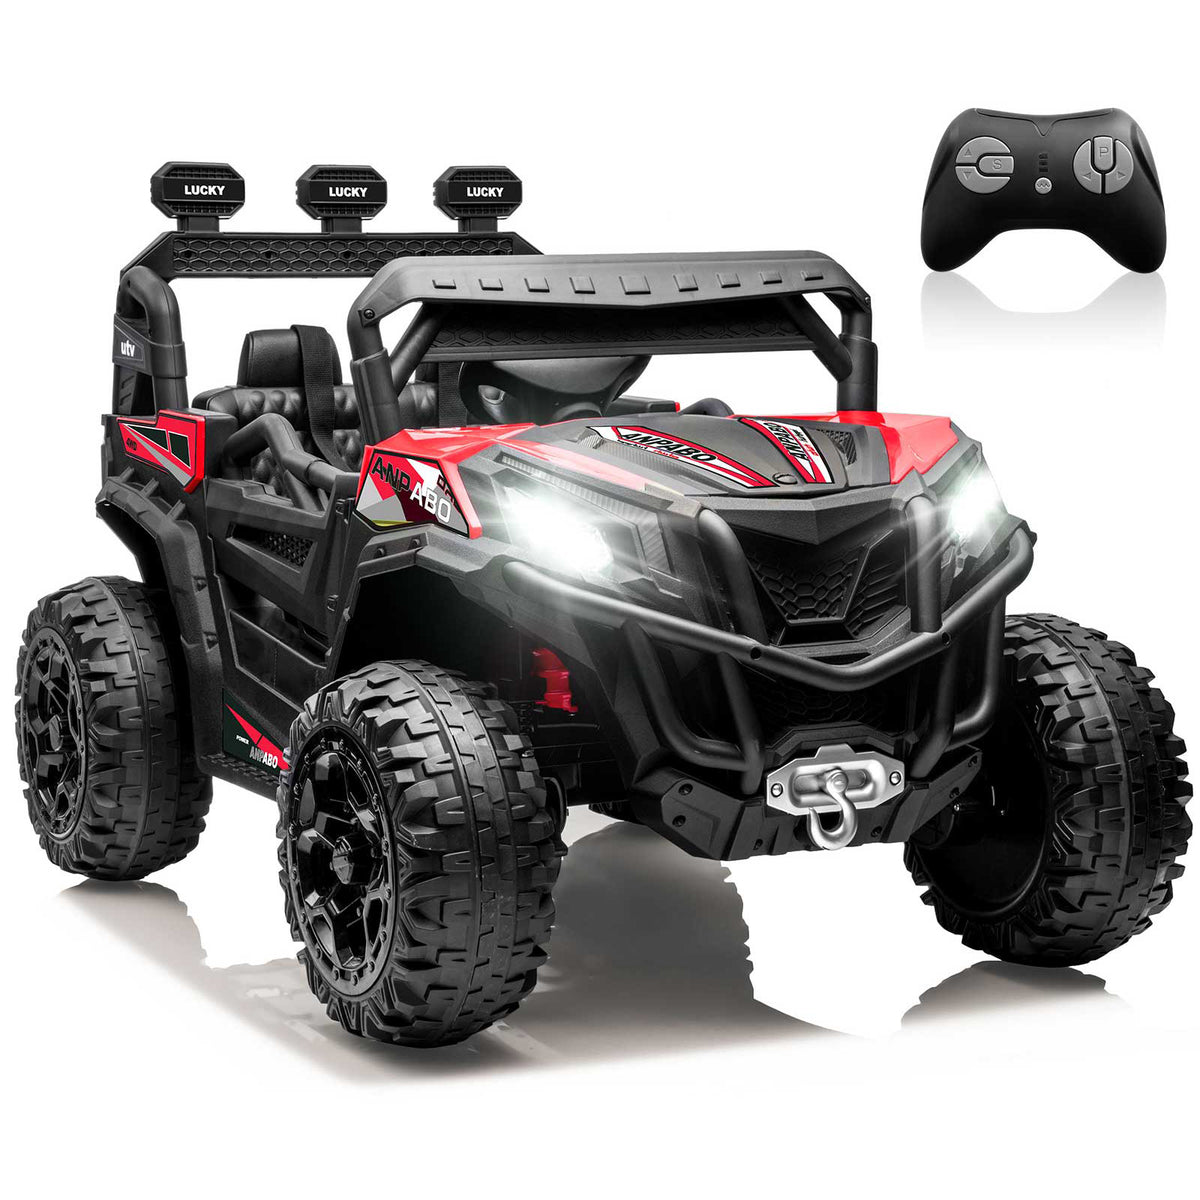 24V 4WD Electric Toy Car Ride on UTV-Red